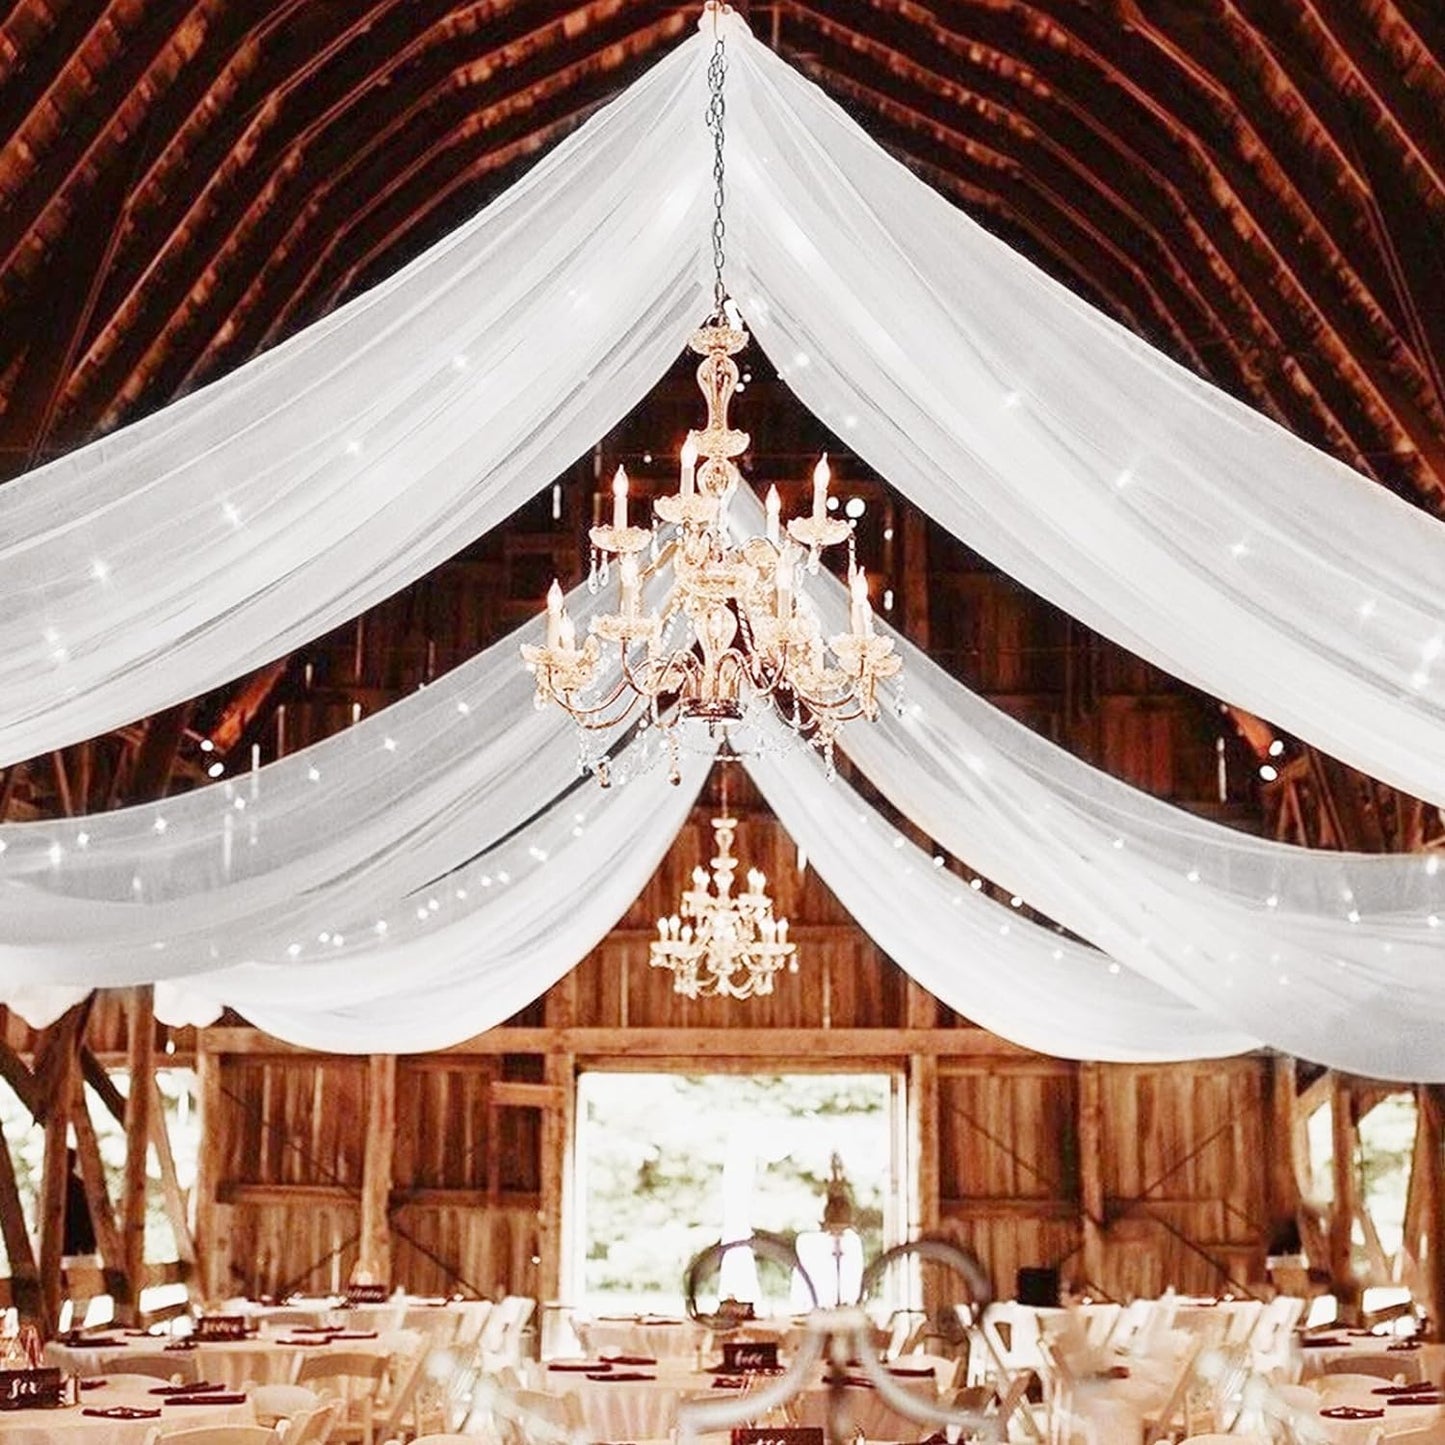 6 Panels White Ceiling Drapes for Wedding Ceiling Drapes 5Ftx20Ft Wedding Arch Draping Fabric Sheer Curtains Voile Chiffon Drapery Draping Wedding Ceiling Decorations for Party Ceremony Stage Swag  Showgeous White 4 Panel-5Ftx10Ft(60"Wx120"L) 